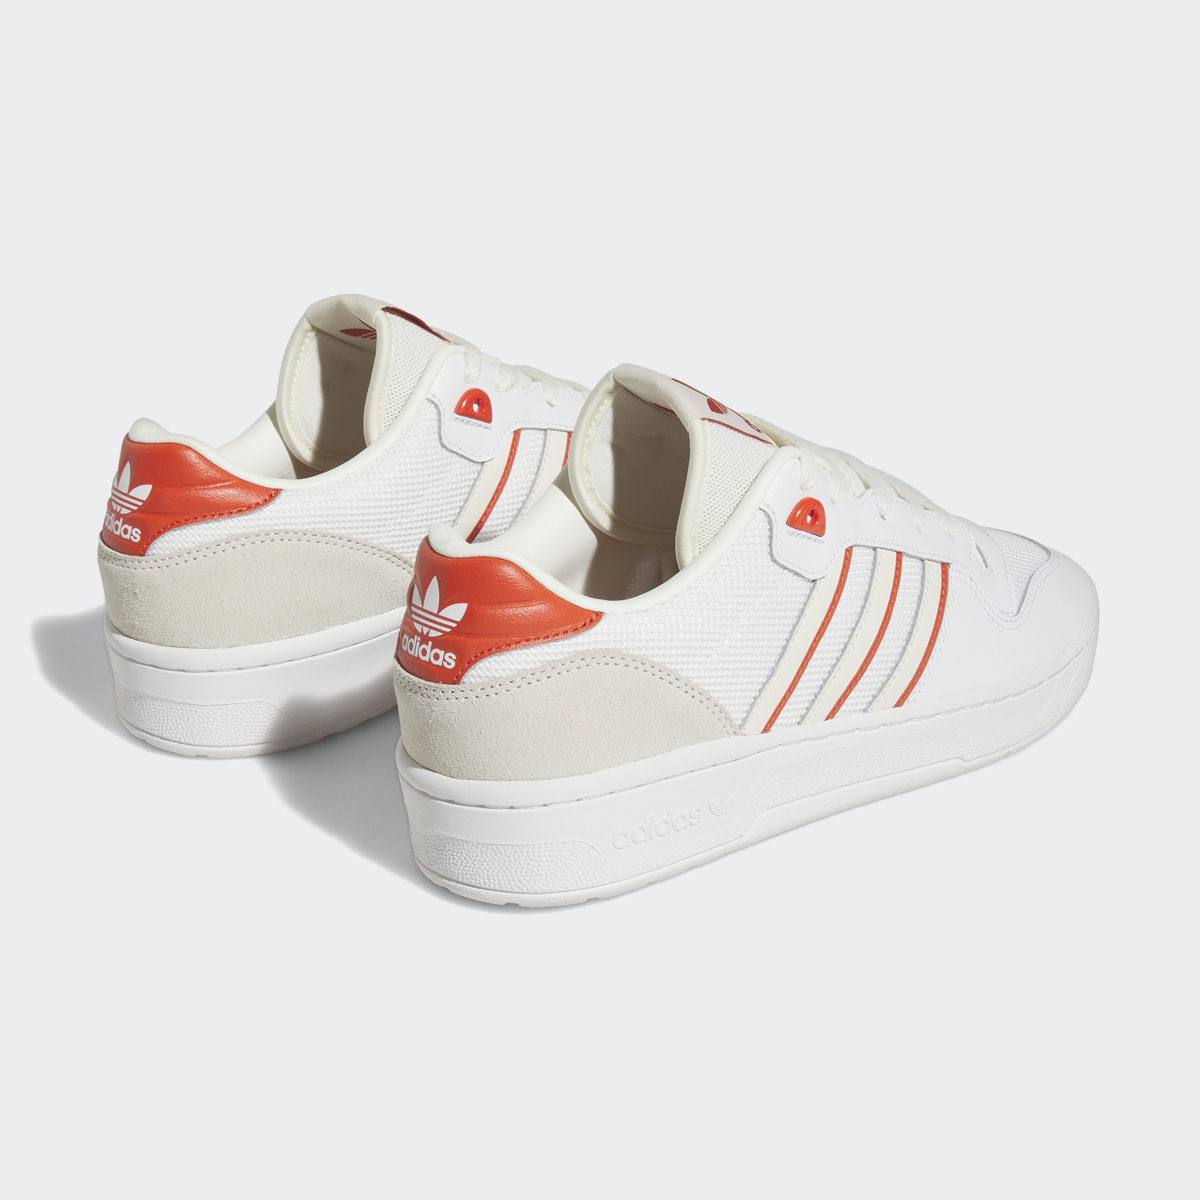 Adidas Chaussure Rivalry Low. 6